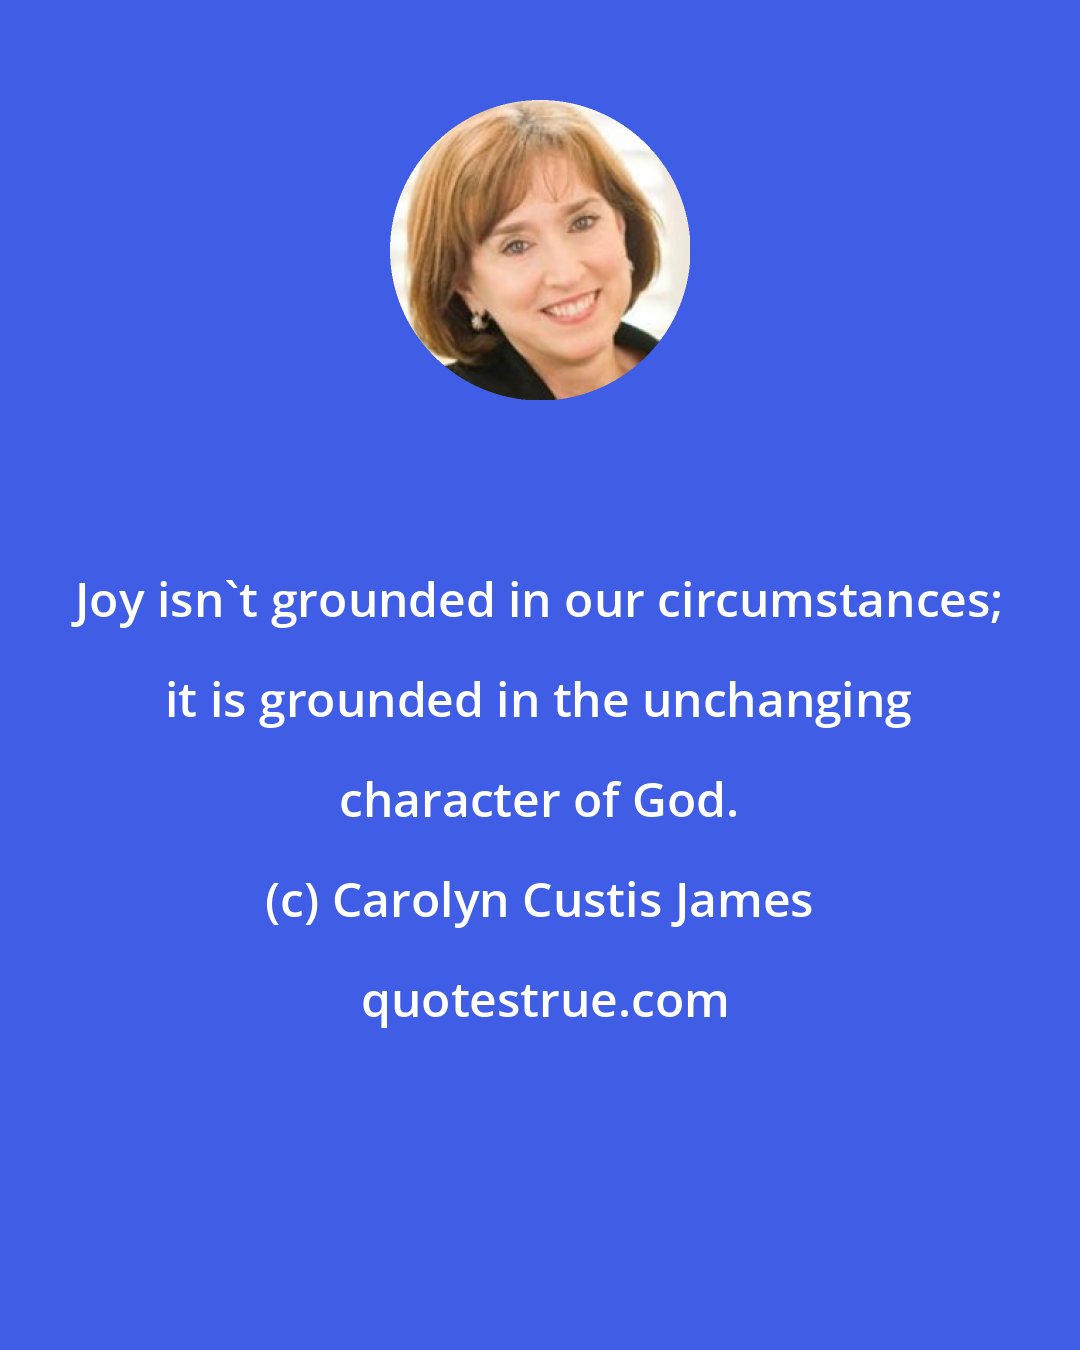 Carolyn Custis James: Joy isn't grounded in our circumstances; it is grounded in the unchanging character of God.